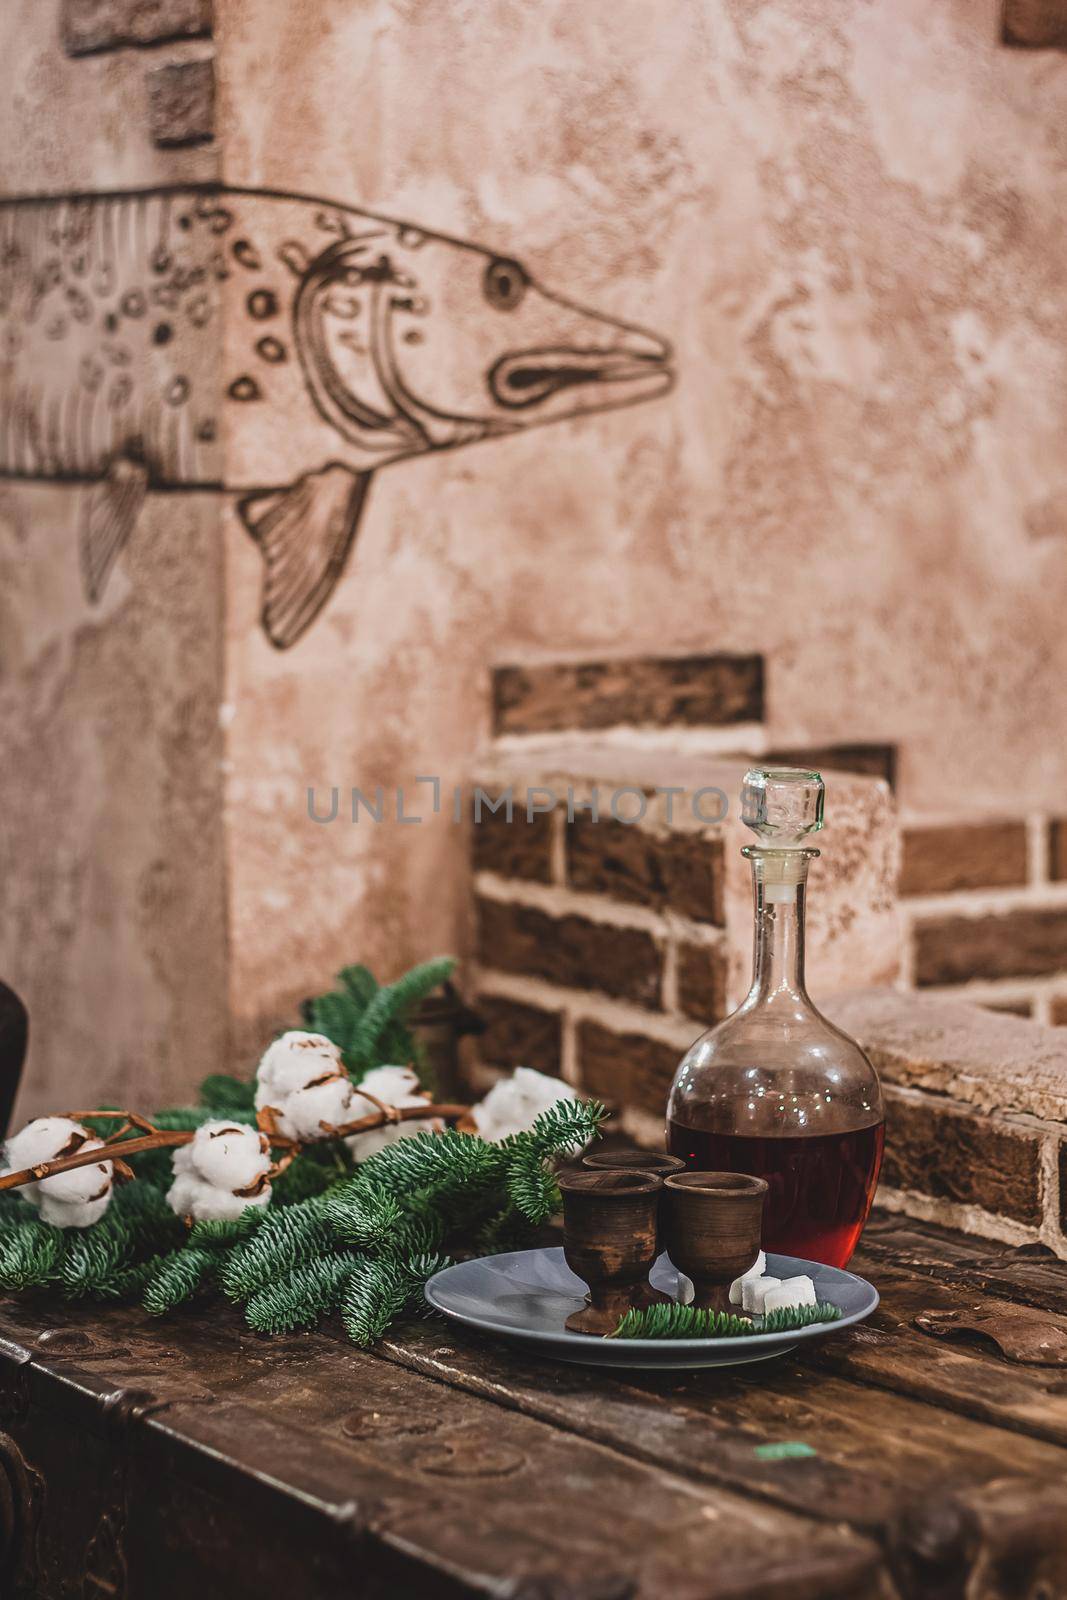 Christmas vintage background, craft alcohol drink and ancient dishes, fluffy fir branches and festive decor